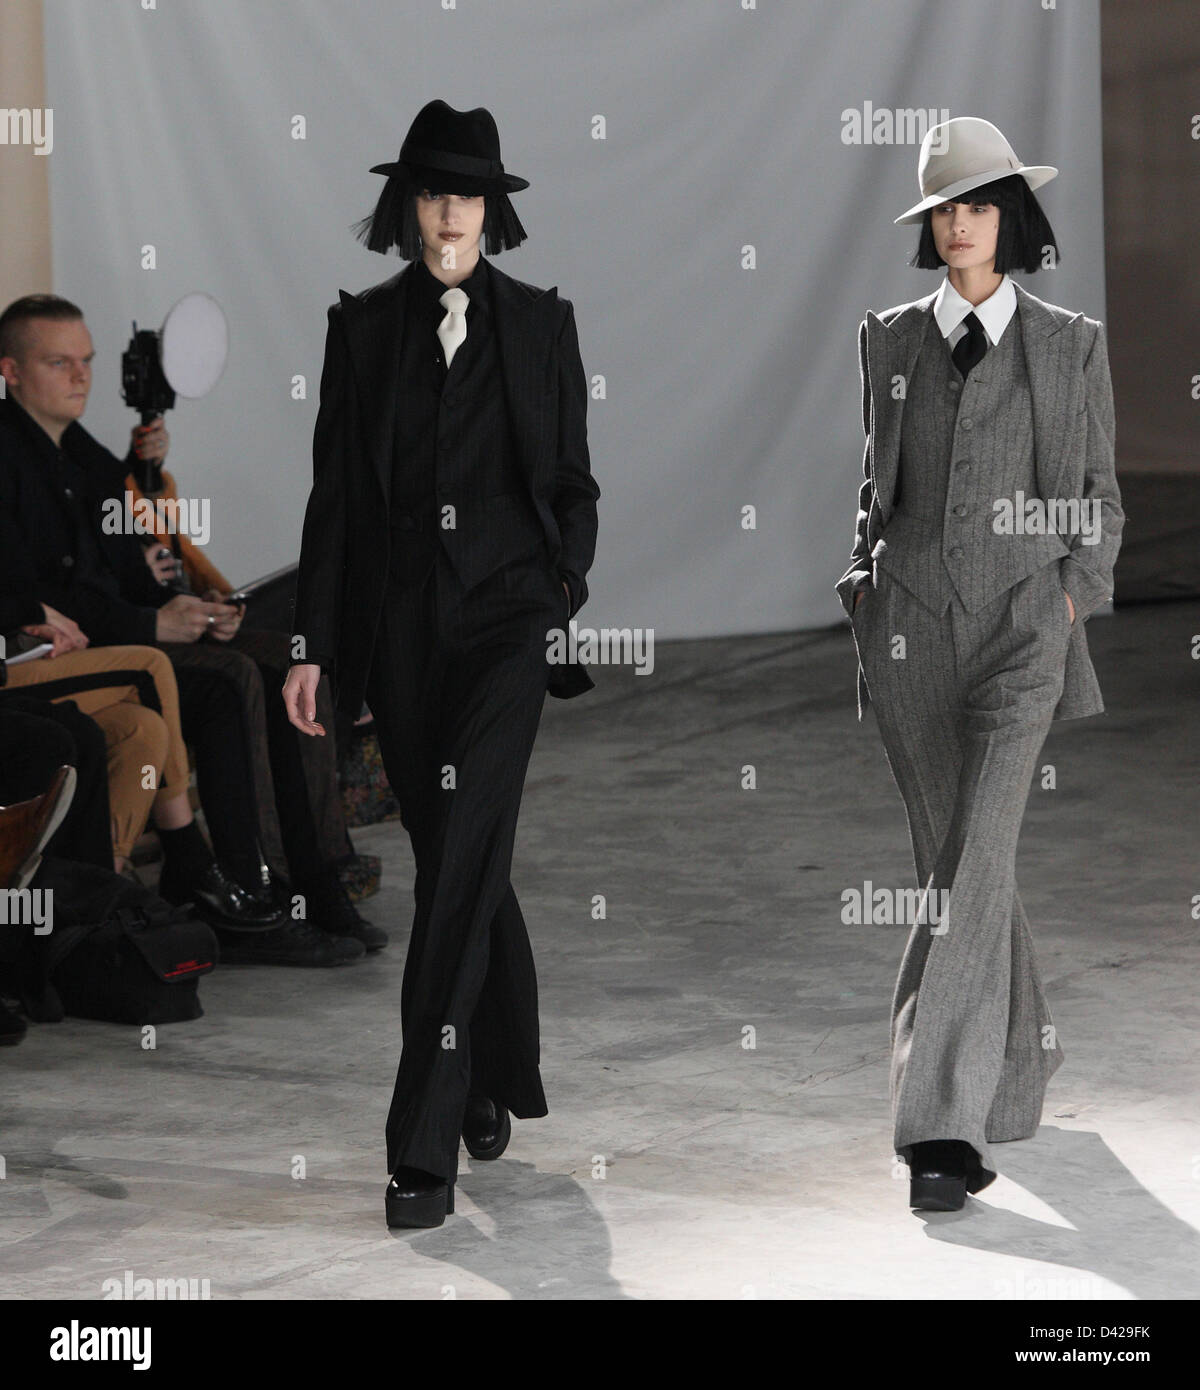 Paris, France. 1st March 2013. Models wear creations by Japanese designer Yohji Yamamoto as part of his fall/winter 2013/2014 collection presented during Paris pret-a-porter fashion week, Paris, 1 March 2013. The Paris pret-a-porter fashion shows run until 6 March 2013. Photo: Hendrik Ballhausen/DPA/ALamy Live News Stock Photo